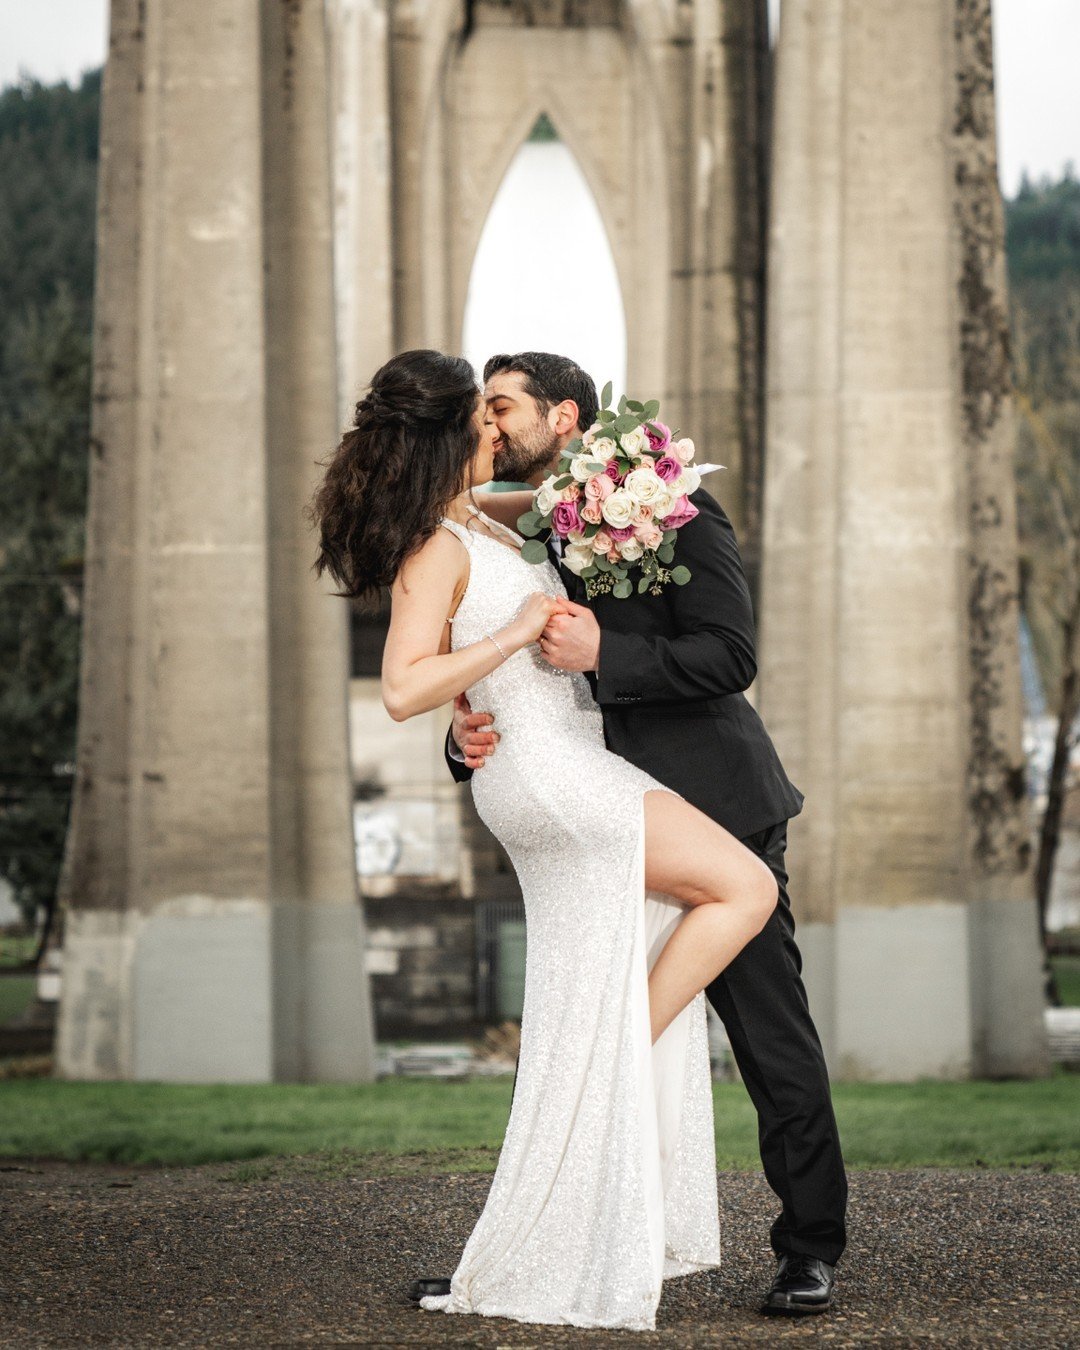 Getting to hang out with Payam &amp; Maryam on their wedding day, just them and I, felt like such an honor. Thank you for sharing that special time with me and making a rainy spring day magical.

#portlandphotographer #pdxphotographer #pnwphotographe